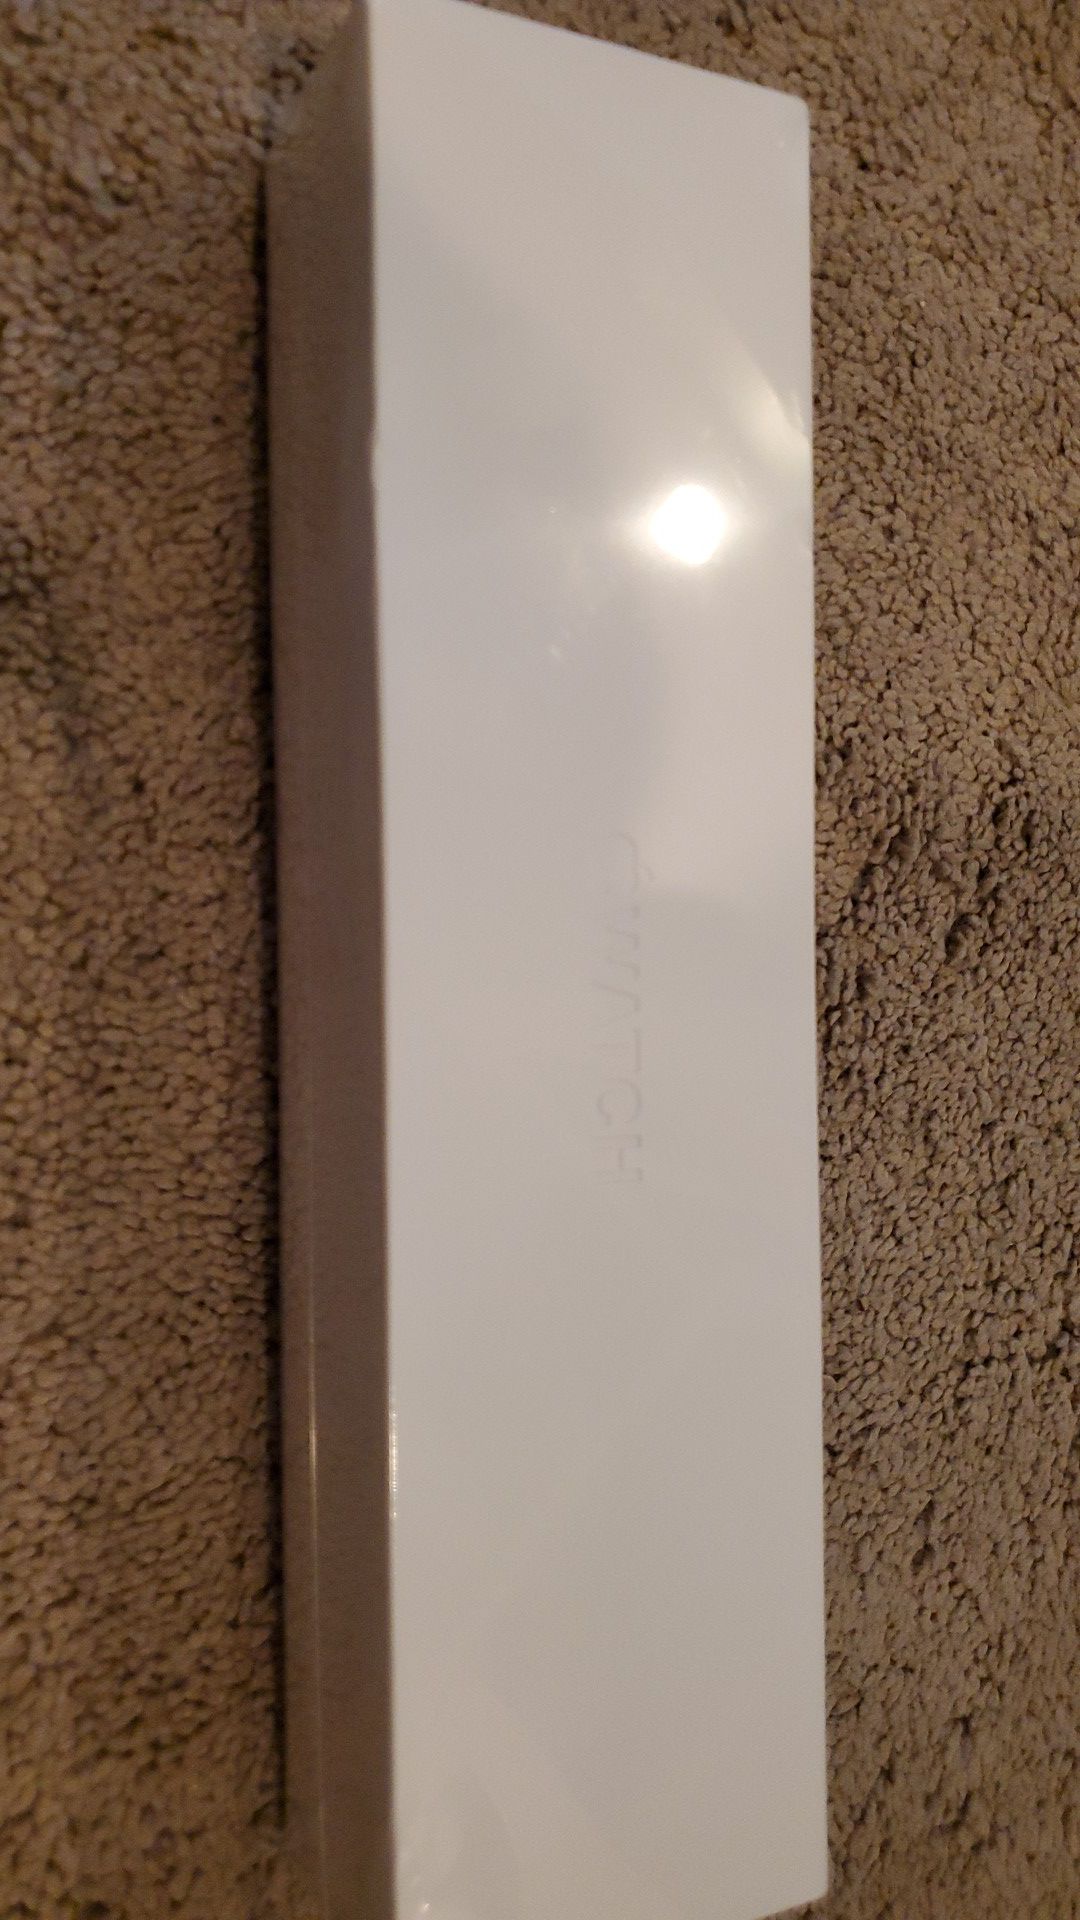 Apple watch series 5 44mm, space gray, new in box